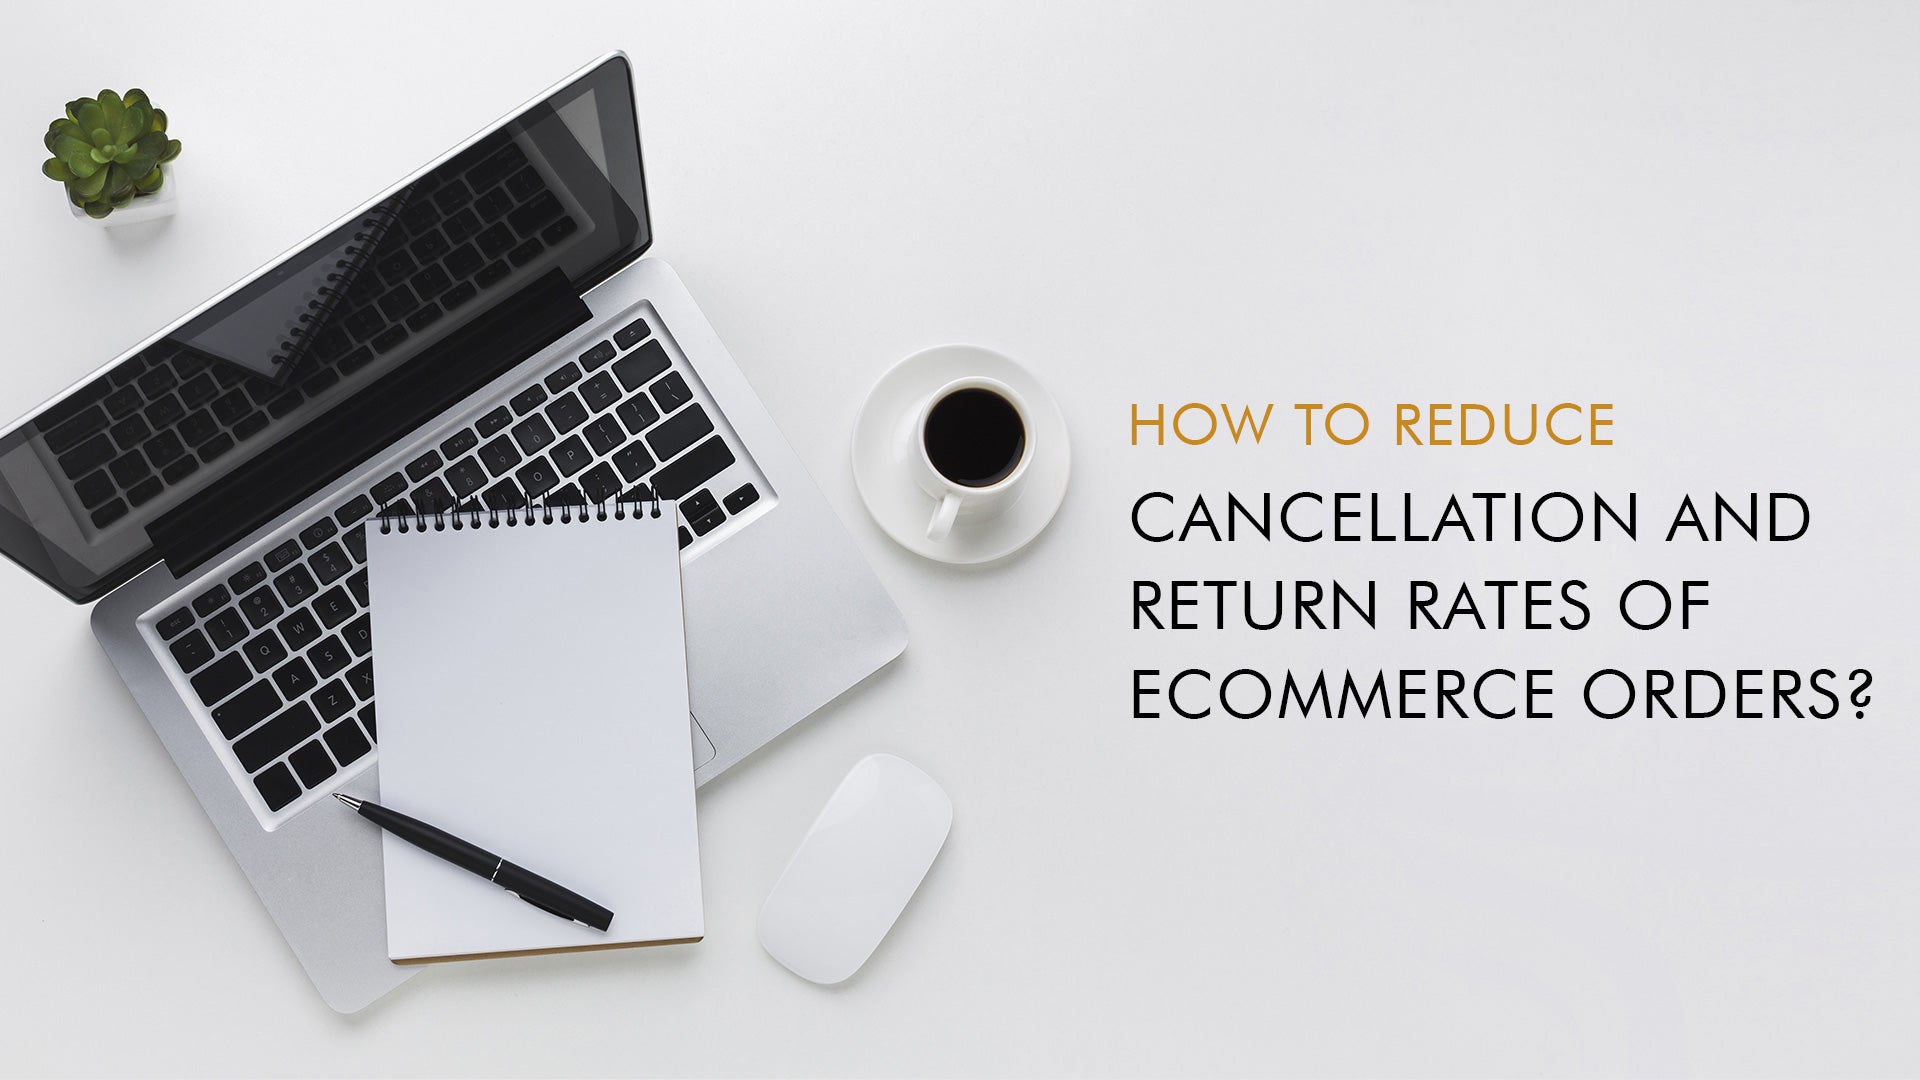 8 Easy Ways you can Reduce Order Returns & Cancellations